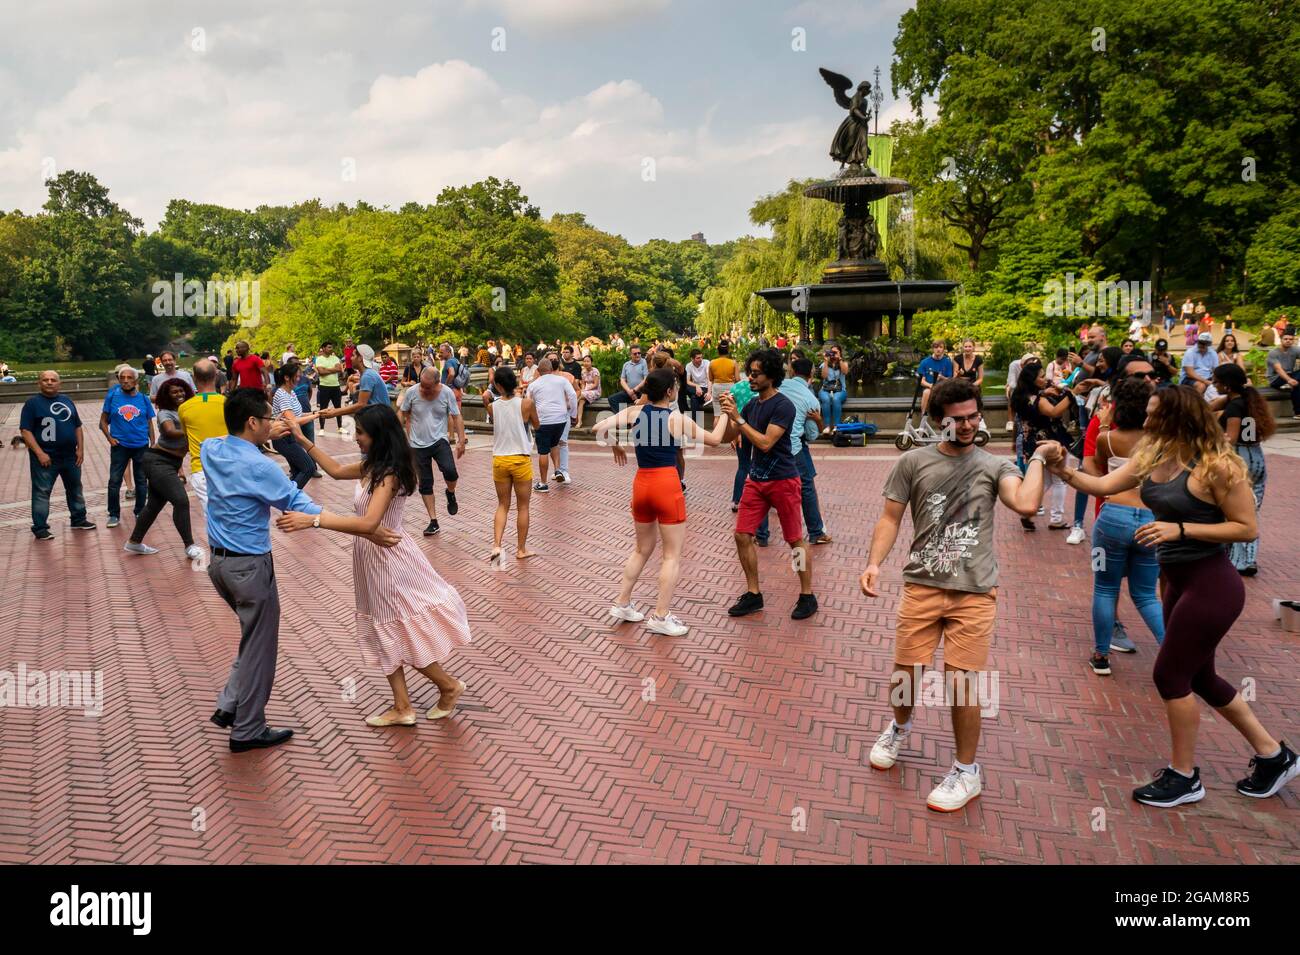 Visitors to Central Park in Bethesda Plaza in New York participate in tango dancing on Sunday, July 25, 2021. (© Richard B. Levine) Stock Photo